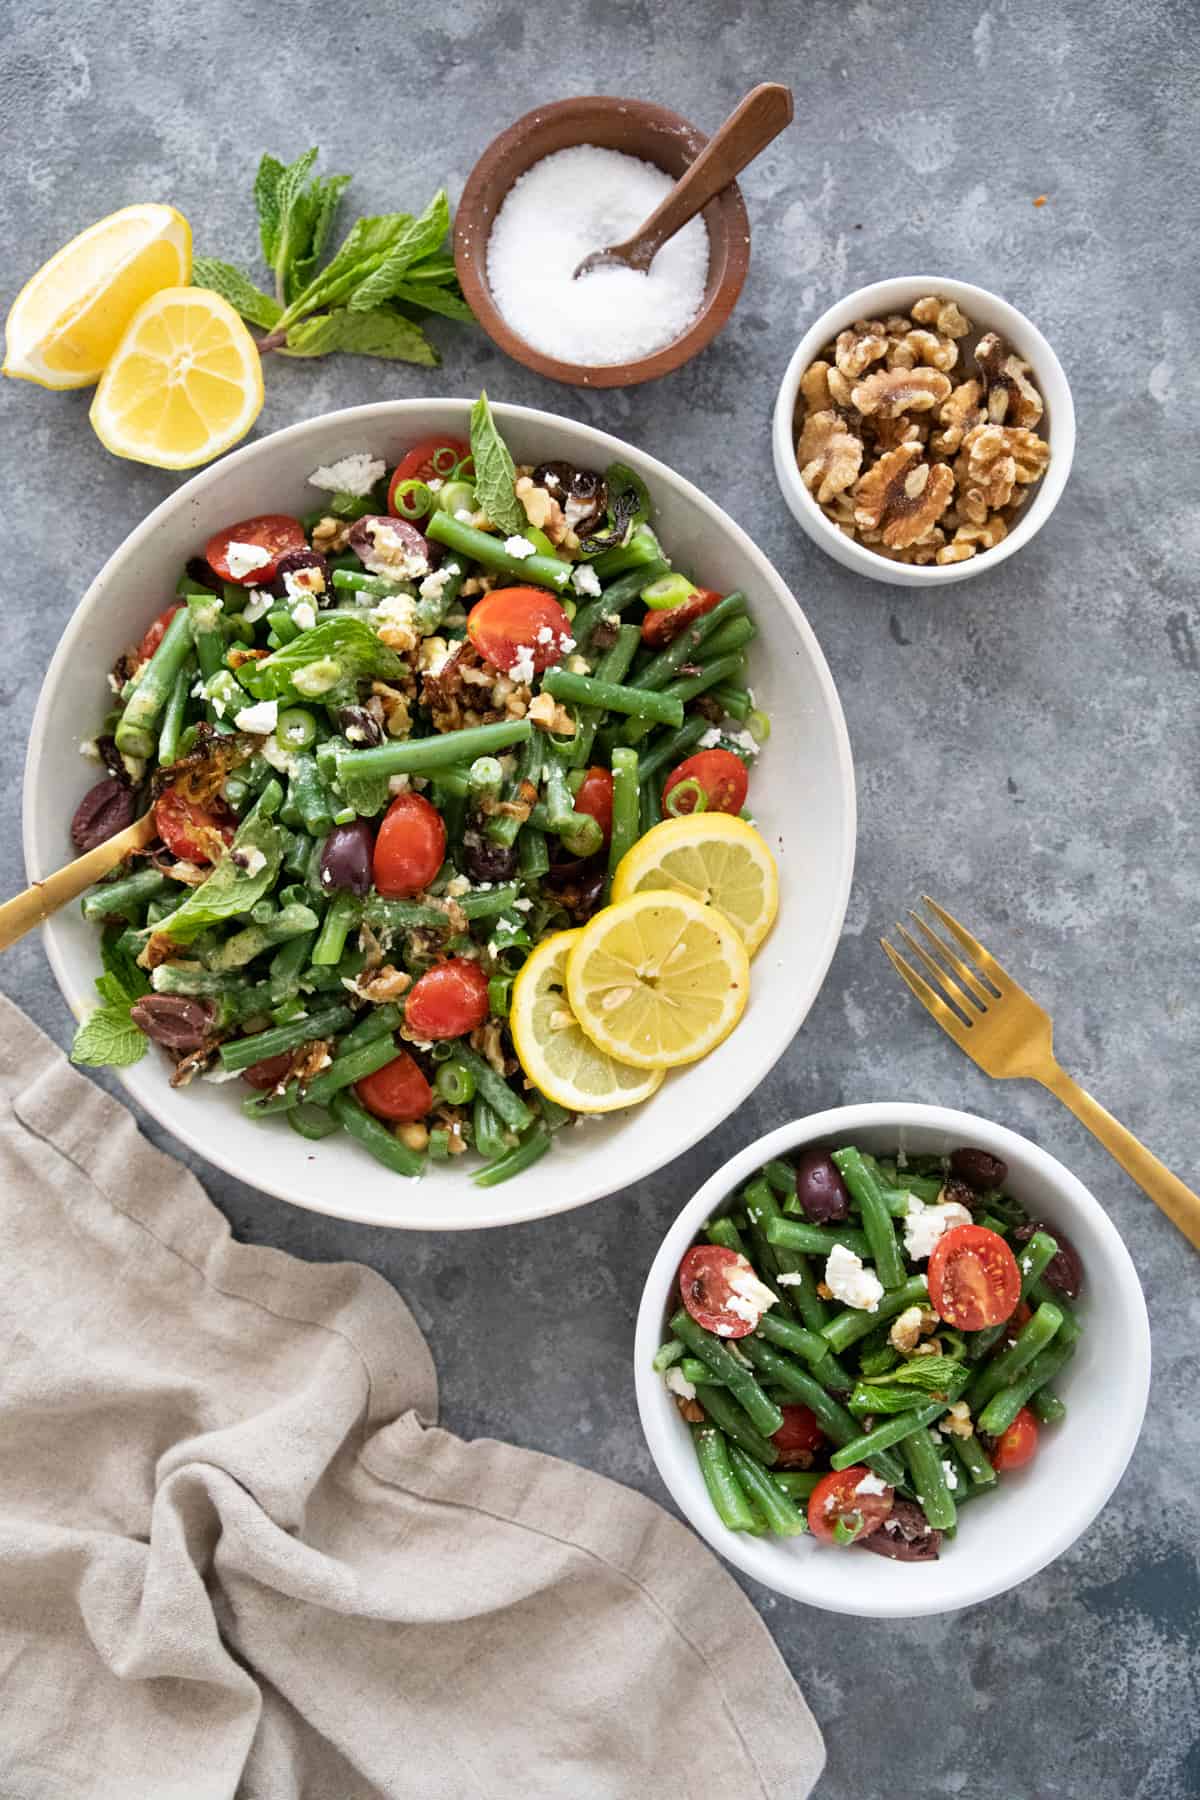 Here's a green bean salad recipe with a Mediterranean twist that can be ready in 20 minutes. Topped with crispy shallots and feta, this salad is packed with a lot of bright flavors. This salad keeps well, so it's fine to make it ahead of time.
